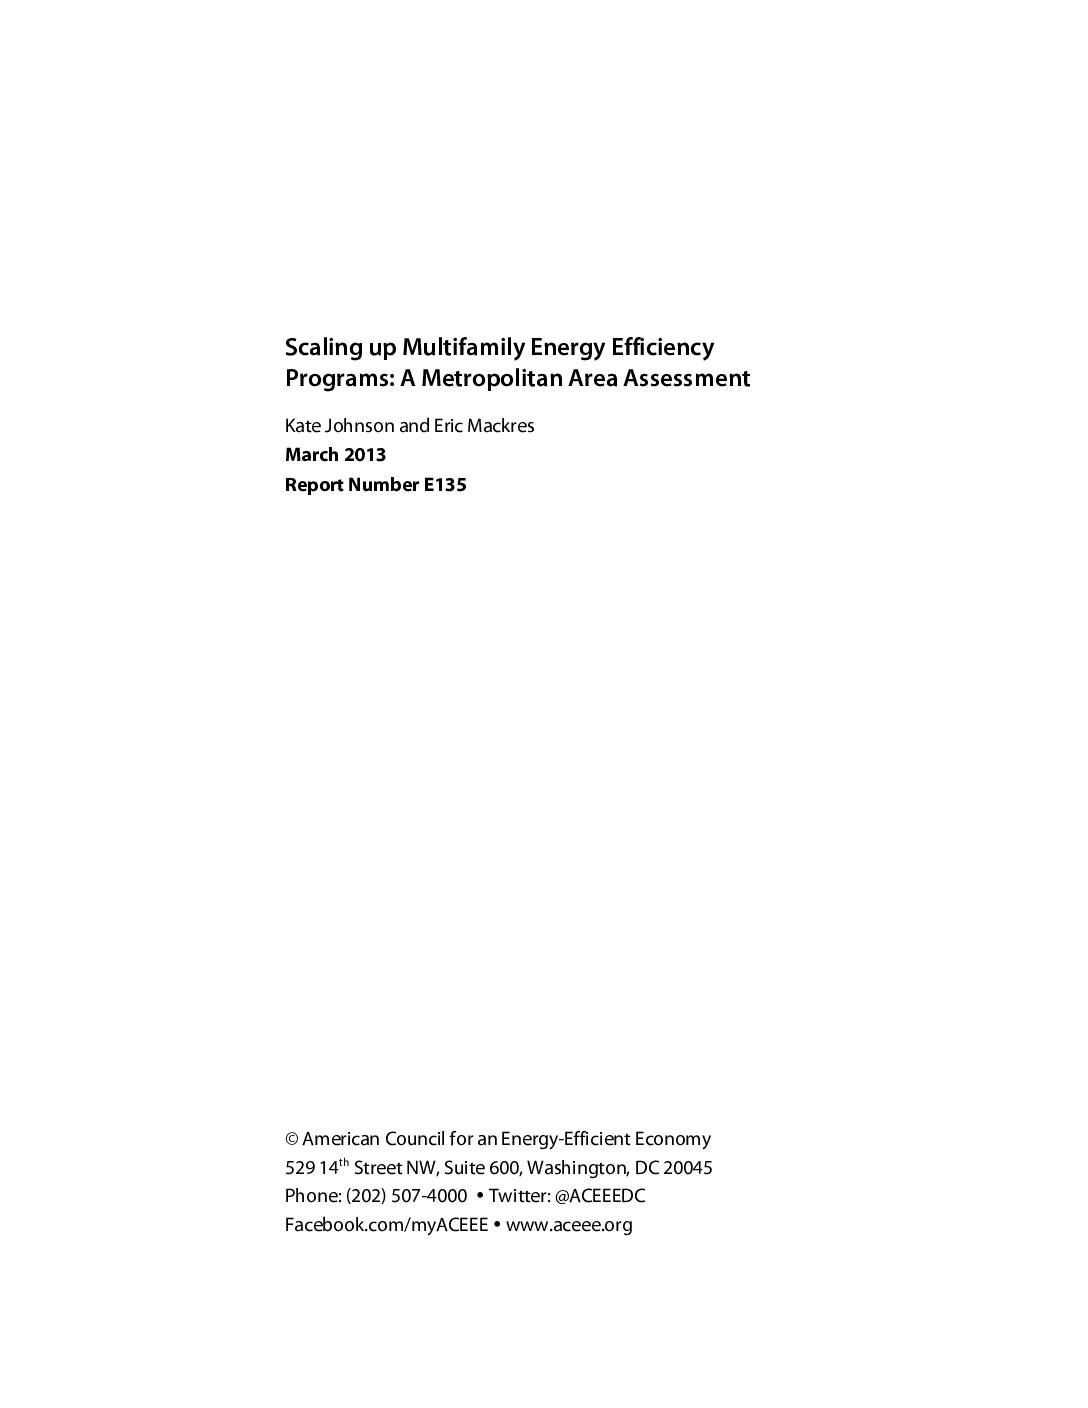 Scaling Up Multifamily Energy Efficiency Programs: A Metropolitan Area Assessment